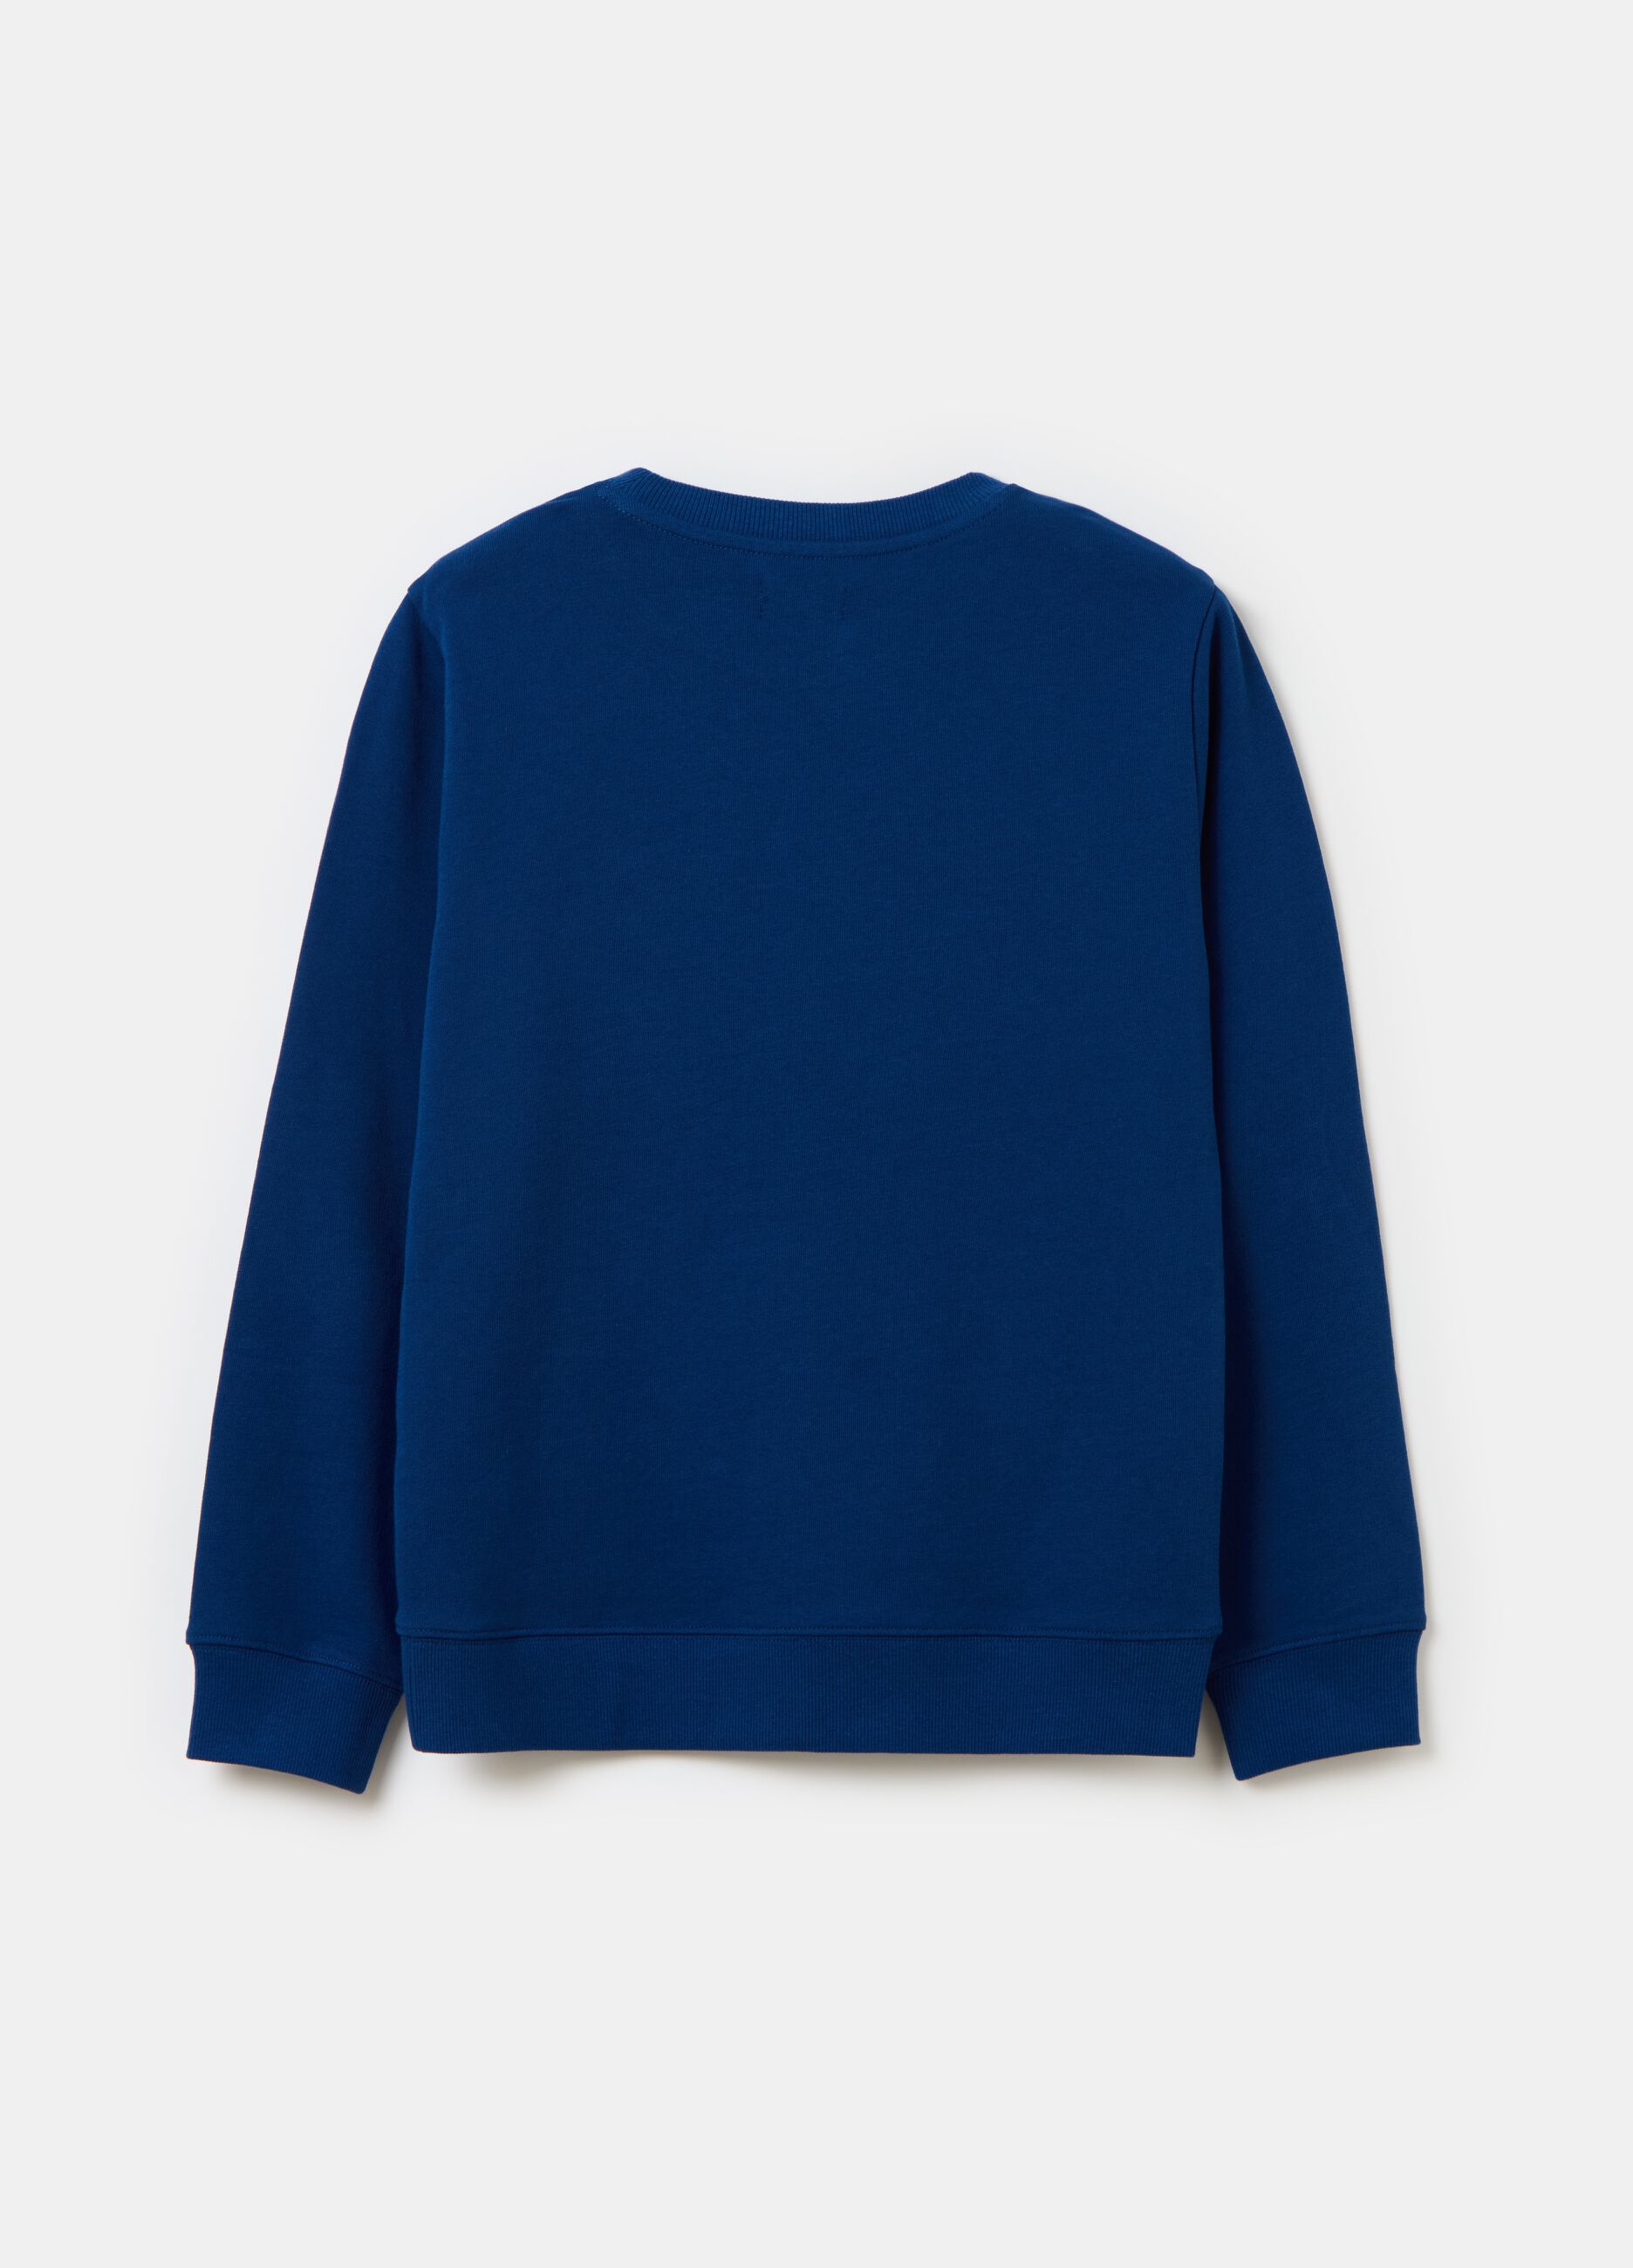 Sweatshirt with round neck and college print